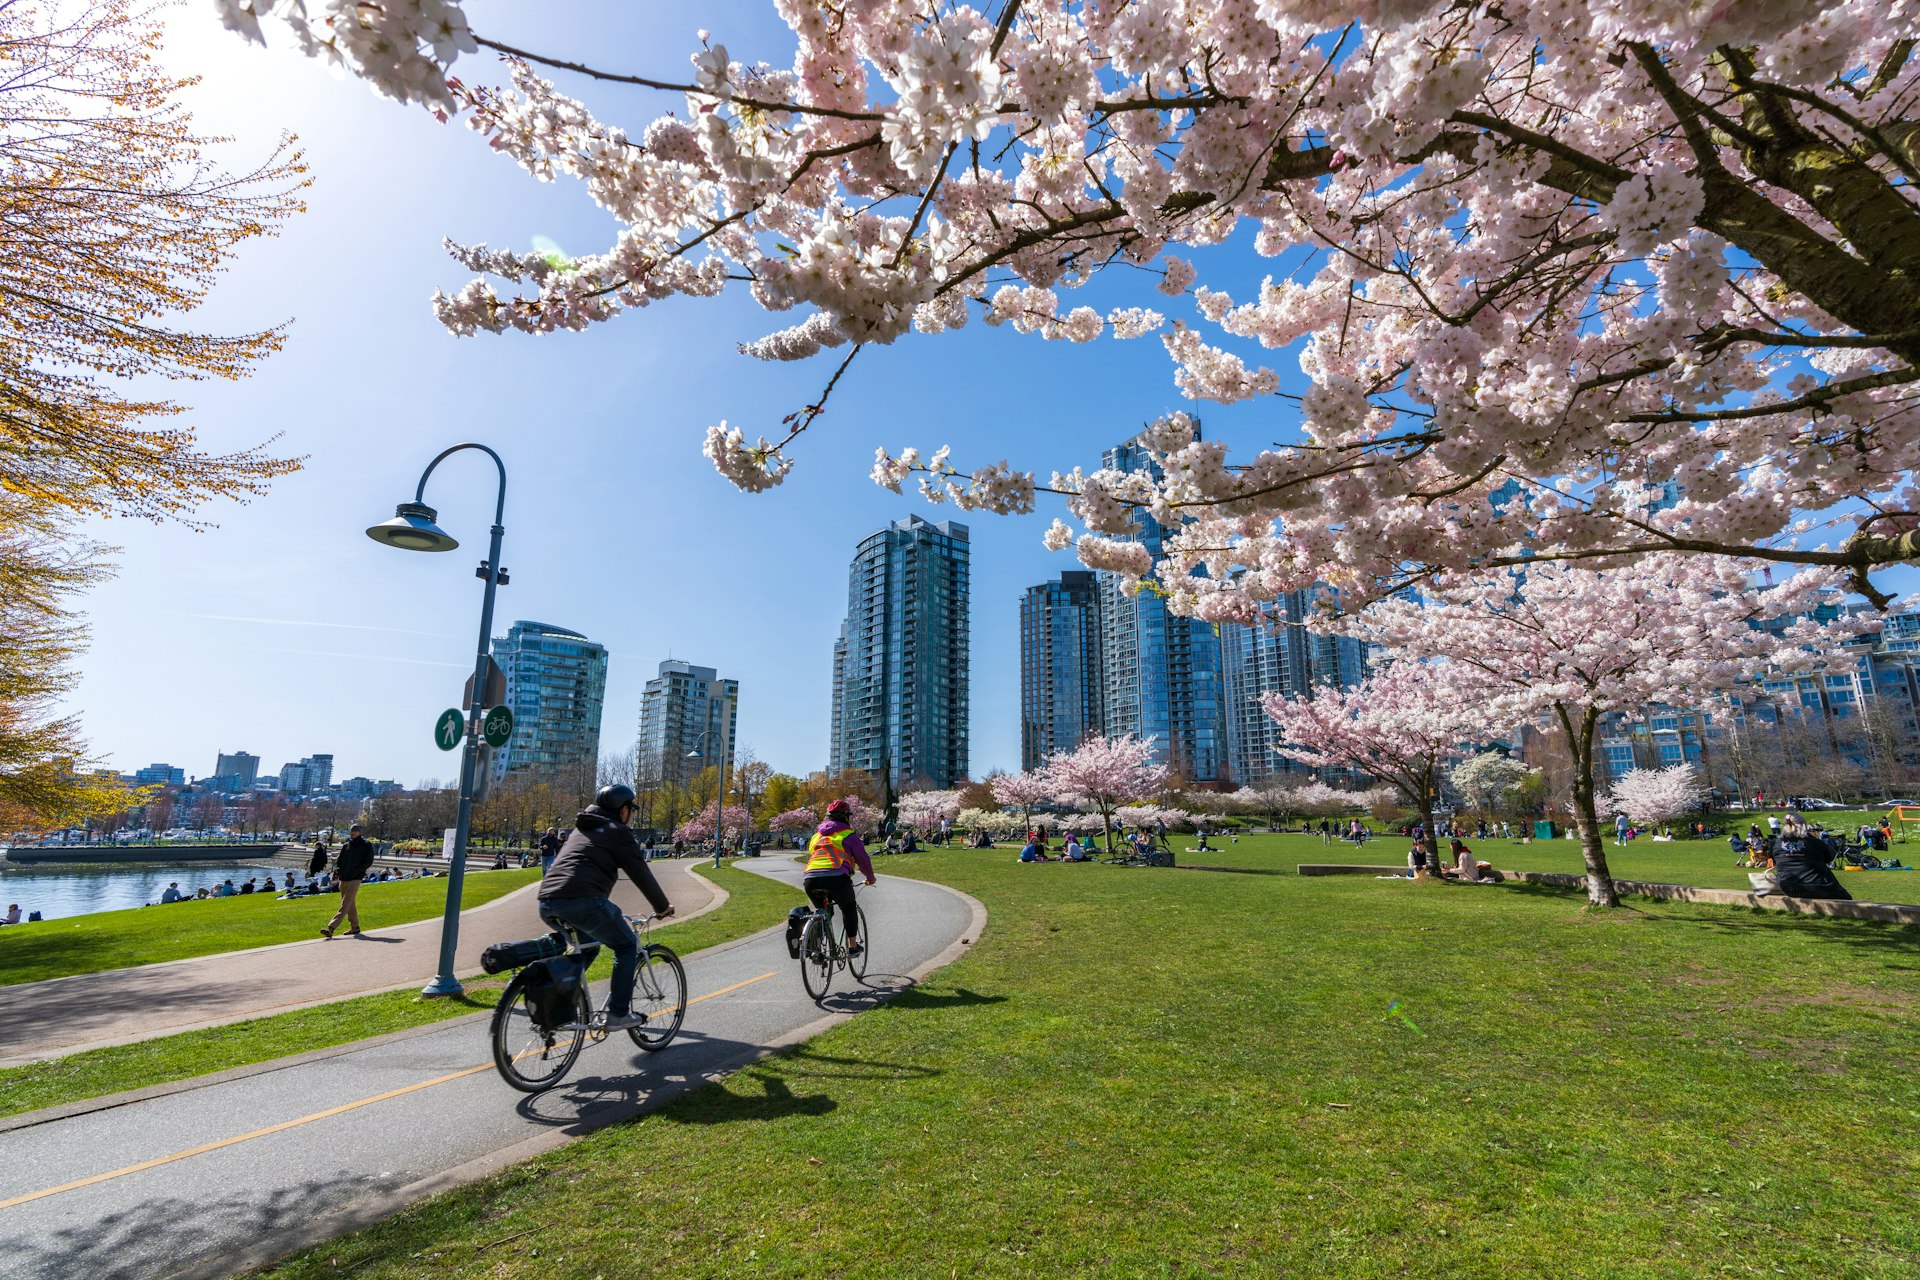 Cyclists ride bikes through a park with paths lined by cherry blossom trees